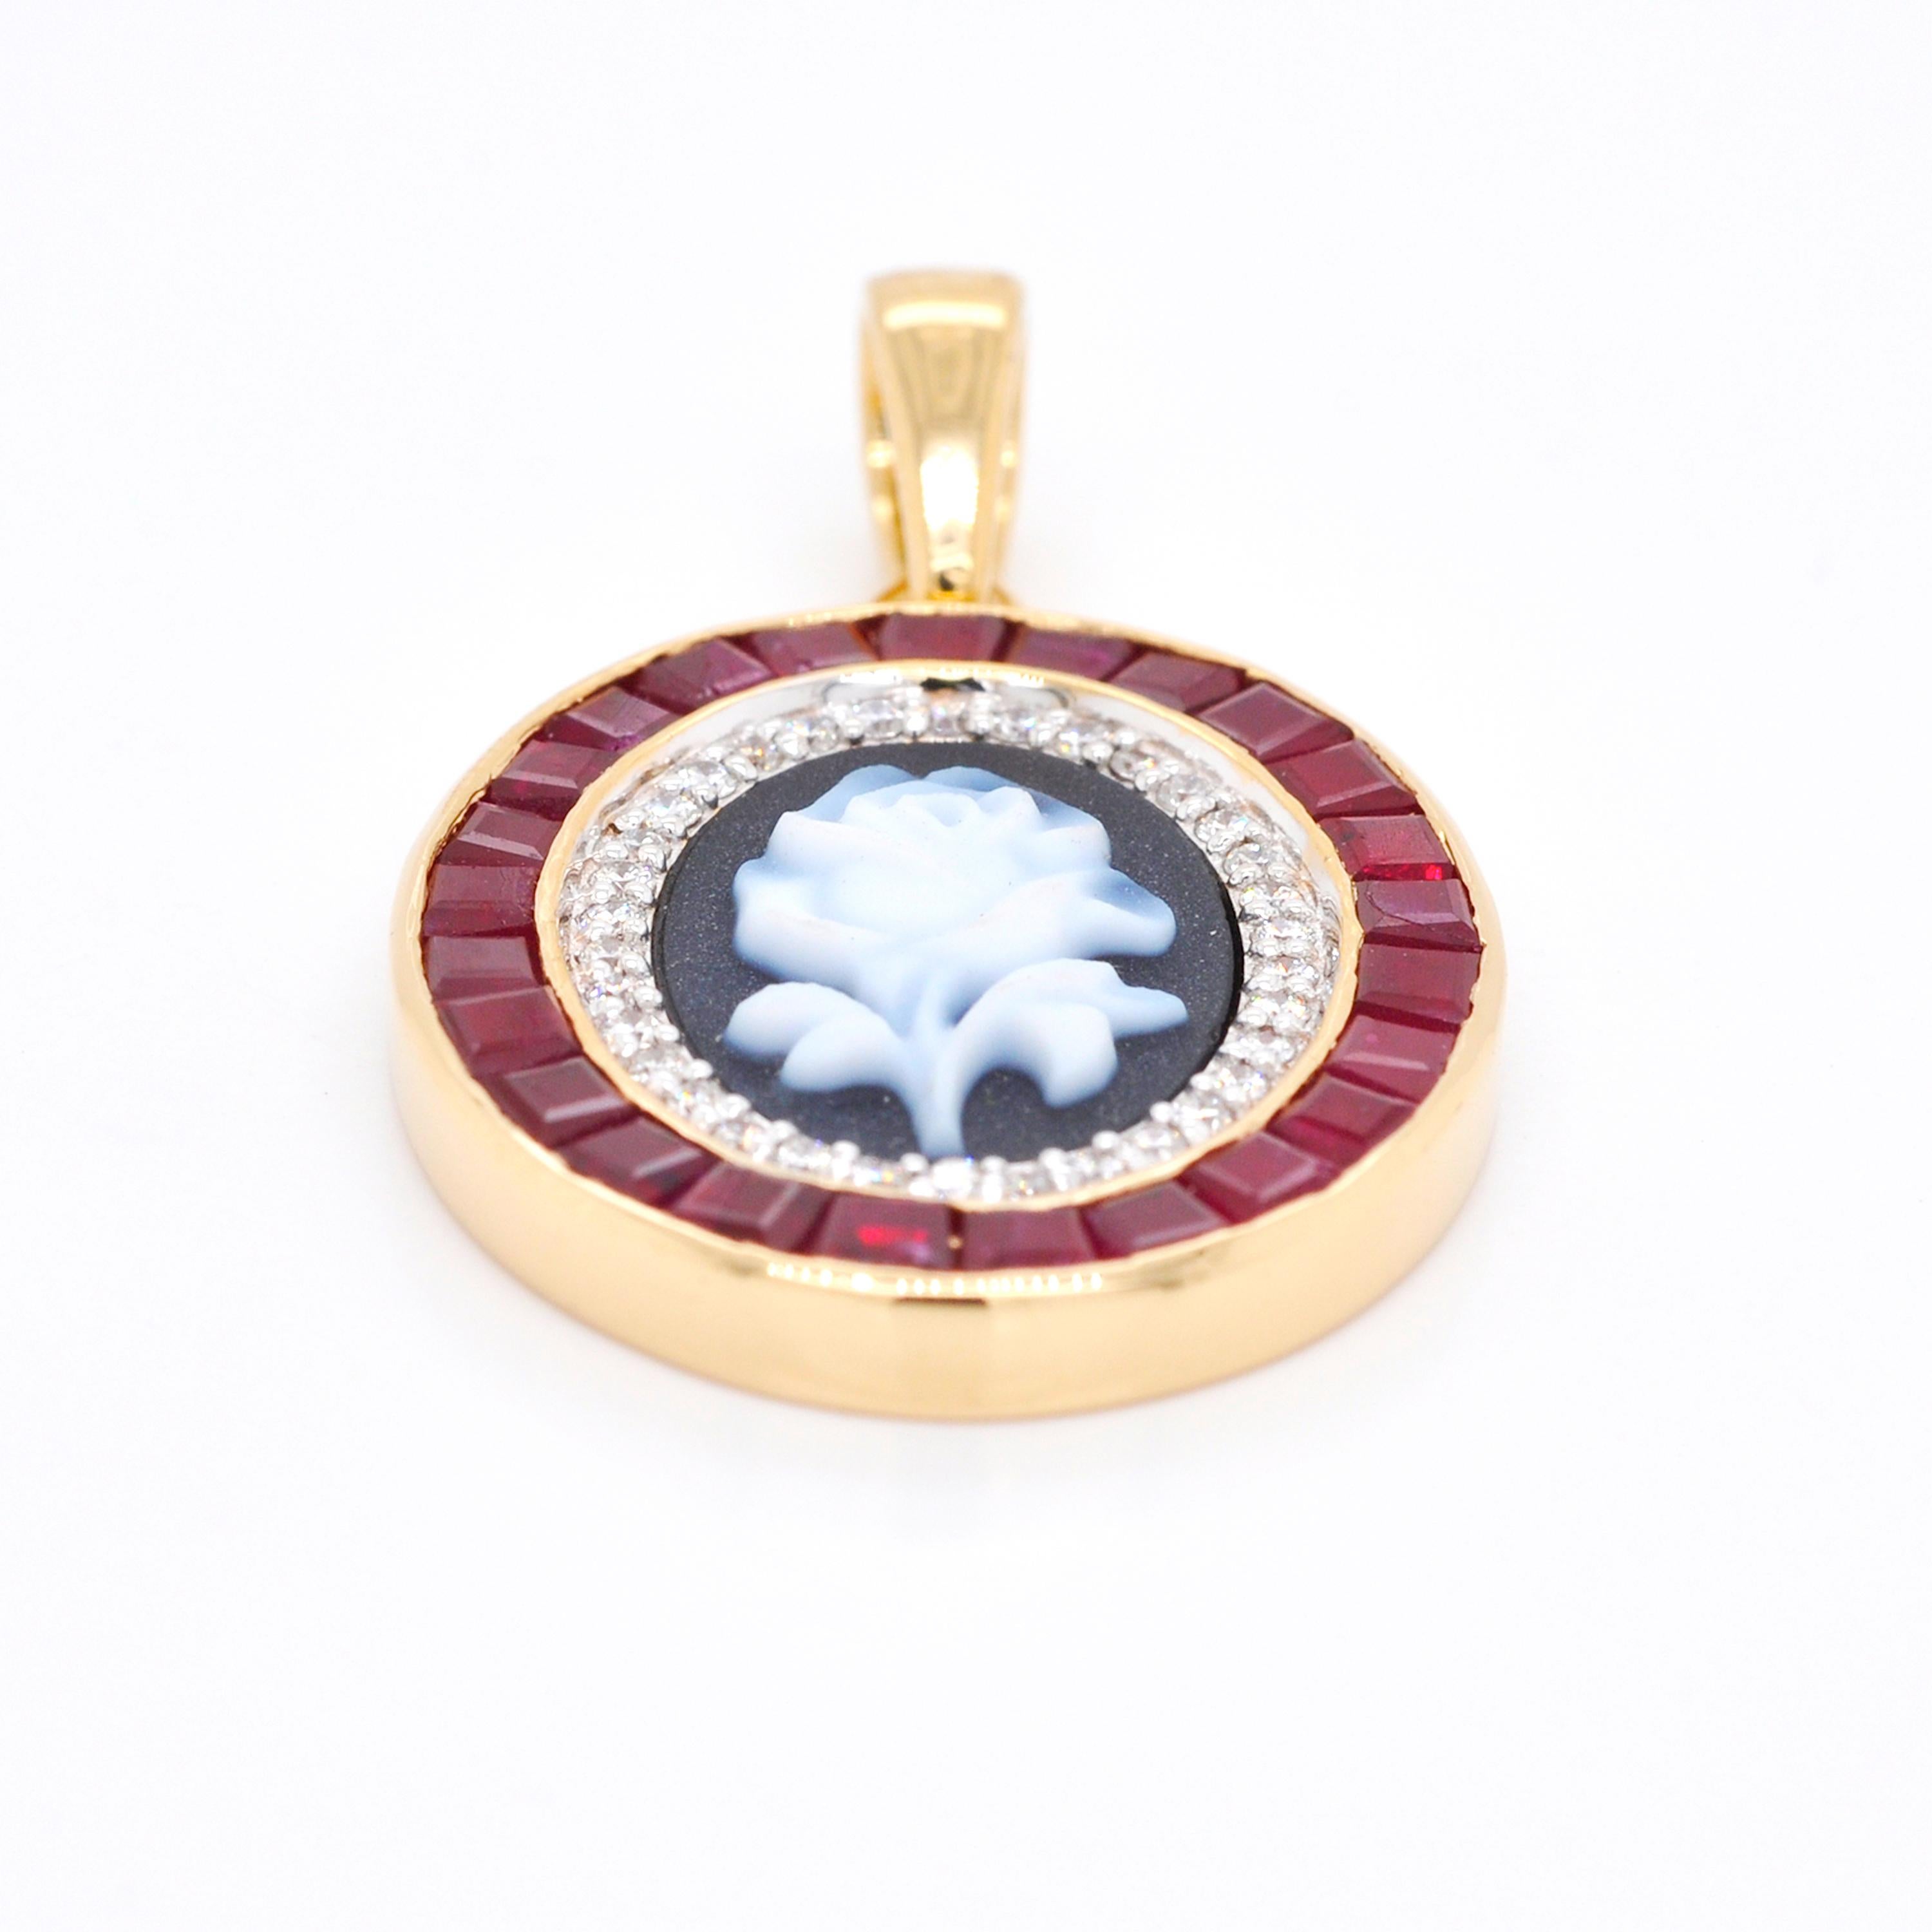 18 Karat Gold Calibre Cut Burma Ruby Diamond Rose Agate Cameo Pendant Necklace In New Condition For Sale In Jaipur, Rajasthan